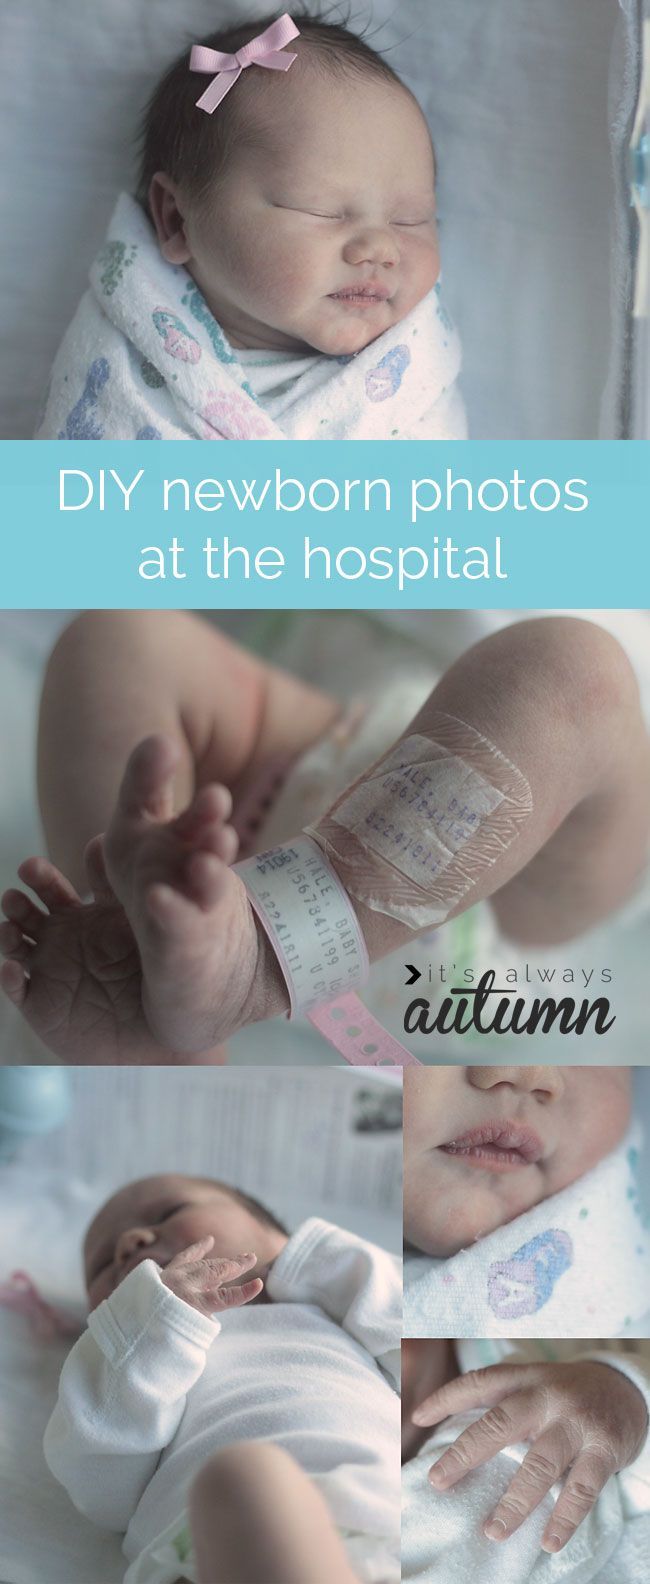 DIY NEWBORN PHOTOS AT THE HOSPITAL | you dont need to be a pro to get amazing photos of your new baby while youre at the hospital